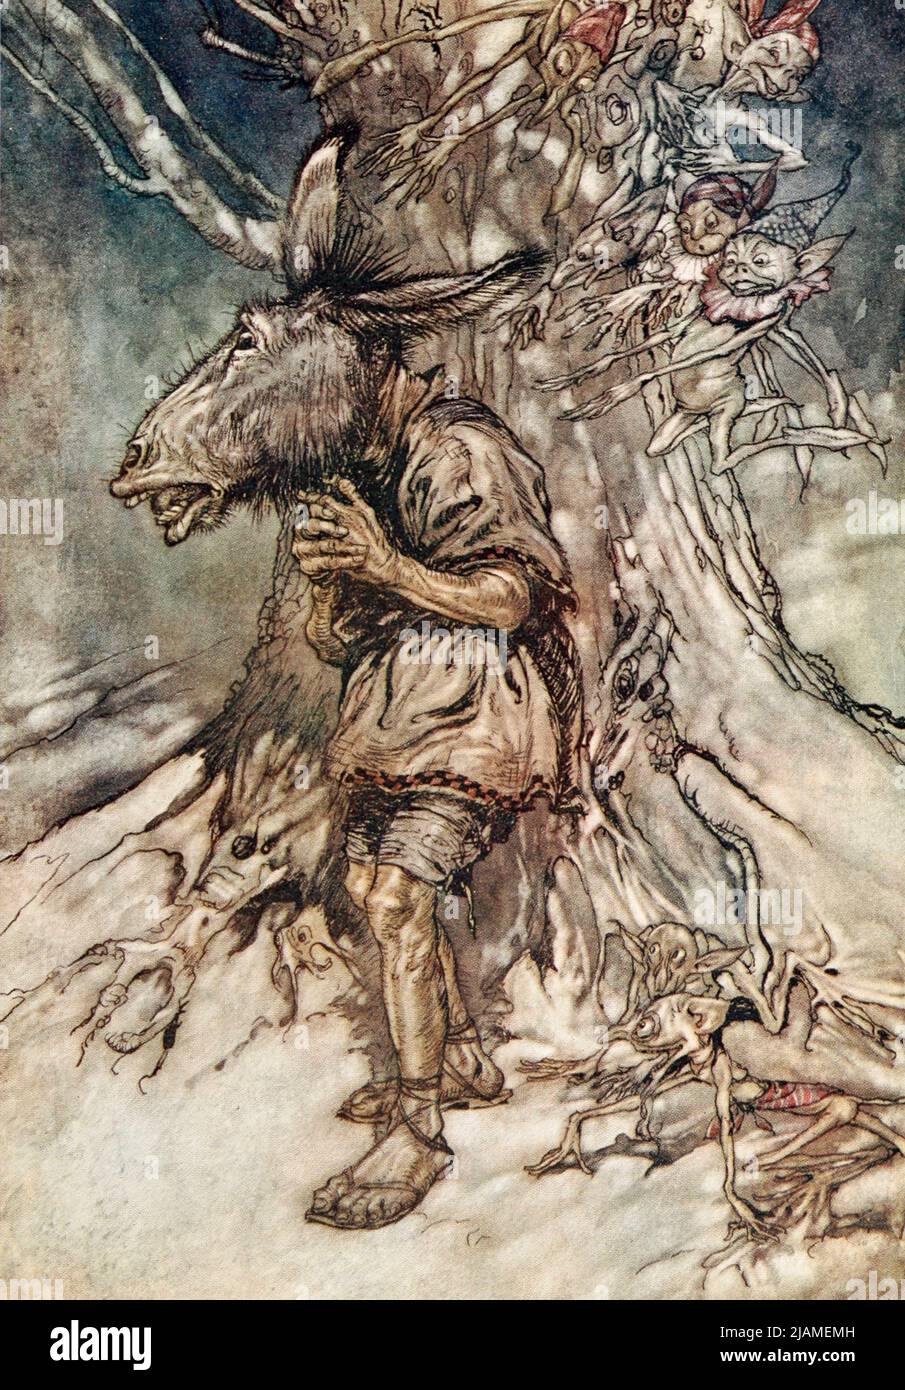 I will sing, that they shall hear I am not afraid from ' A midsummer night's dream ' by William Shakespeare, 1564-1616; Illustrated by Arthur Rackham, 1867-1939 Publication date 1908 Publisher London, Heinemann; New York, Doubleday, Page & Co Stock Photo